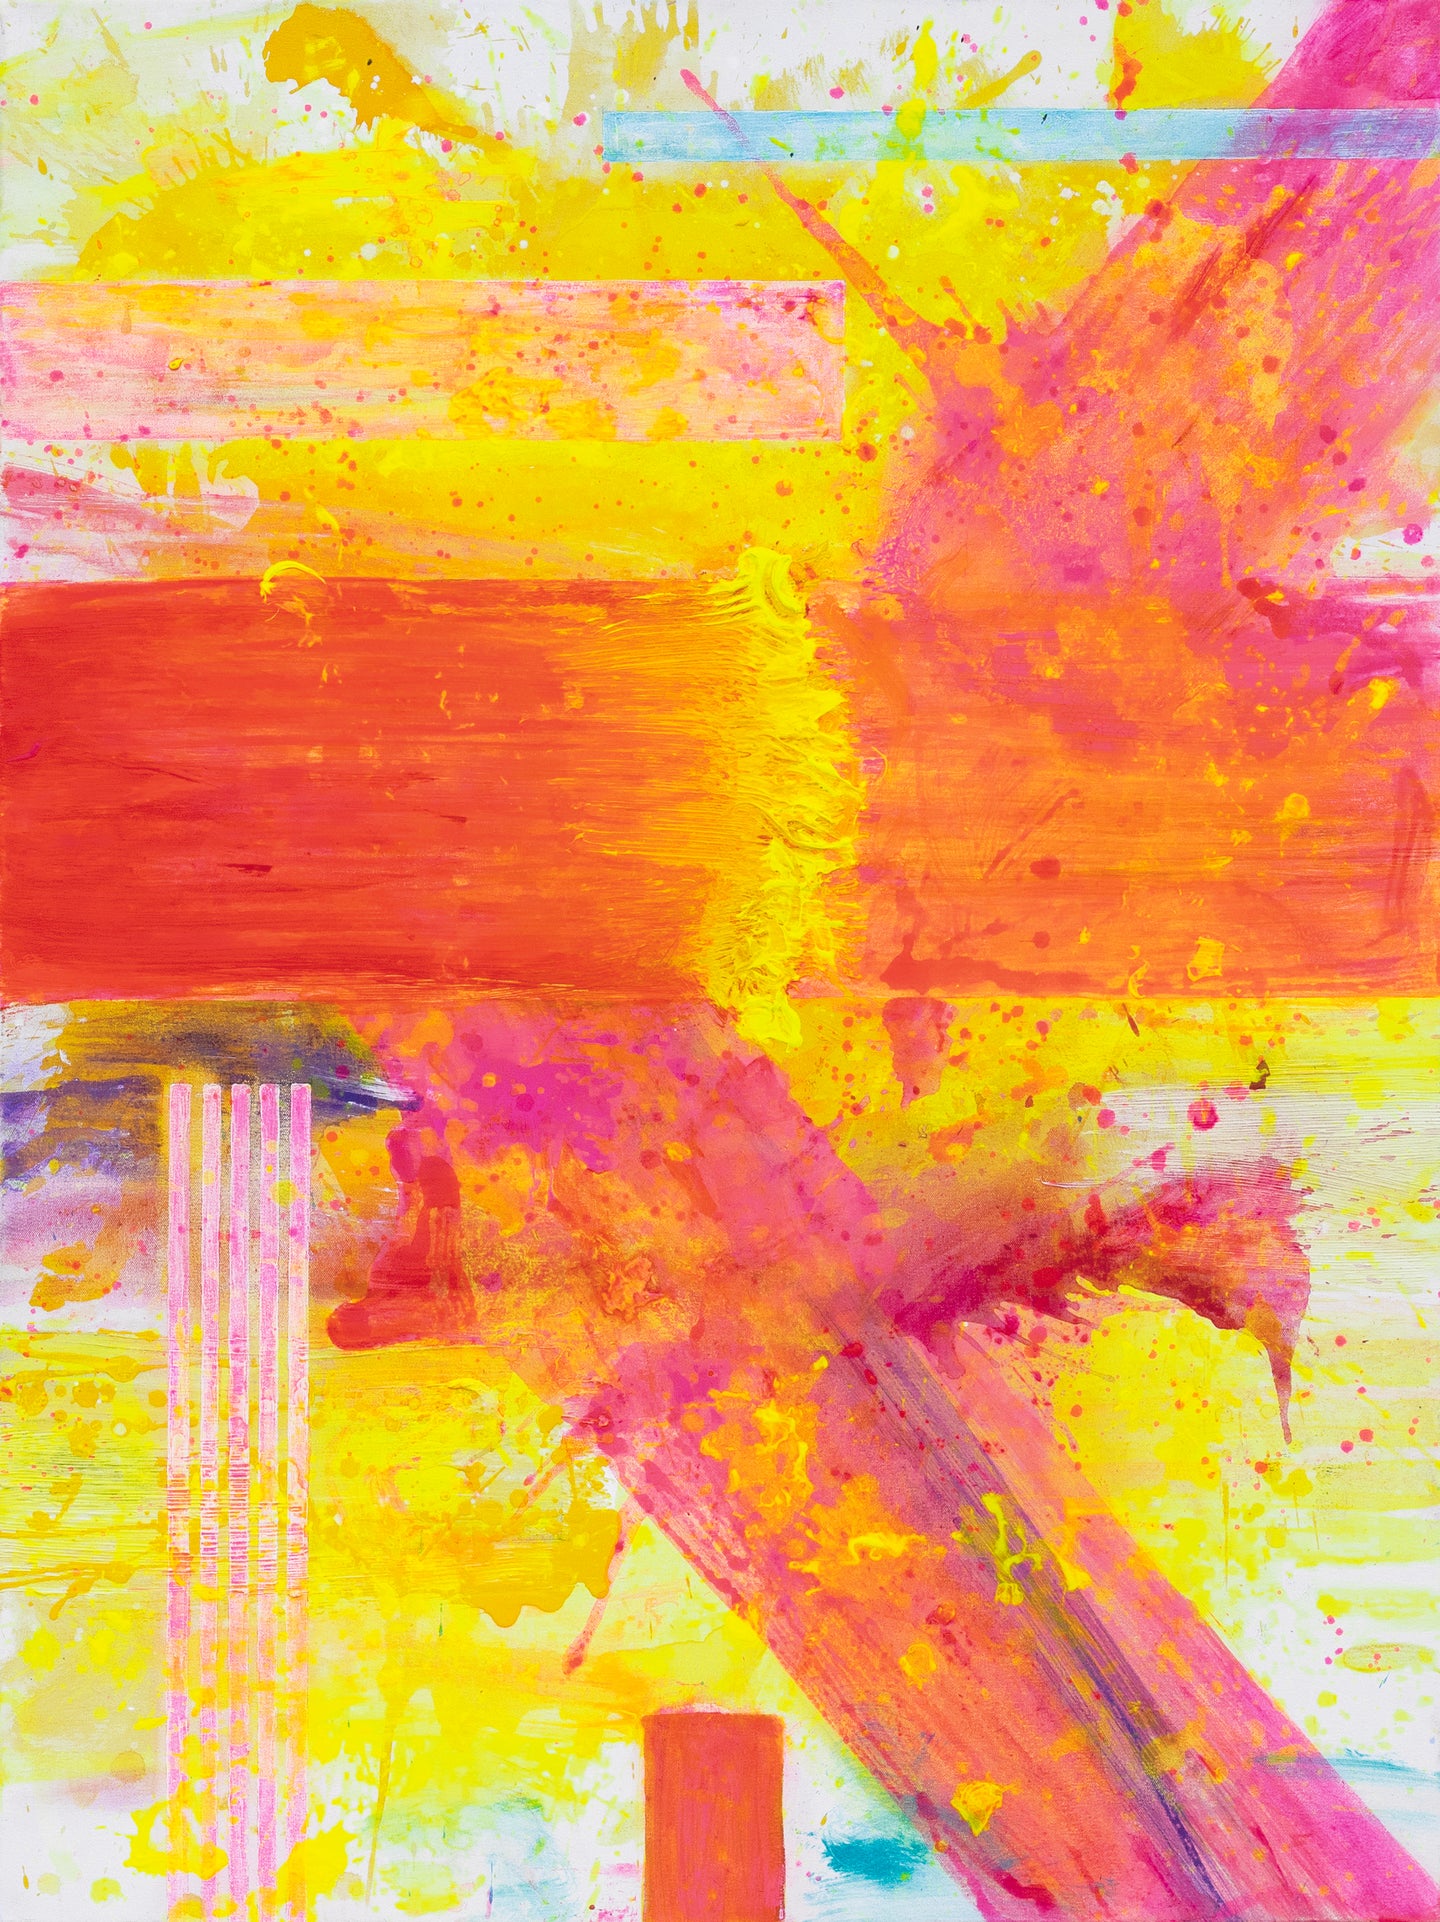 J. Steven Manolis, Palm Beach Light Sunrise without Symbology, Acrylic on canvas, 2019, 48 x 36 inches, pink, yellow, orange, Gestural Abstraction, Abstract expressionism art for sale at Manolis Projects Art Gallery, Miami, Fl